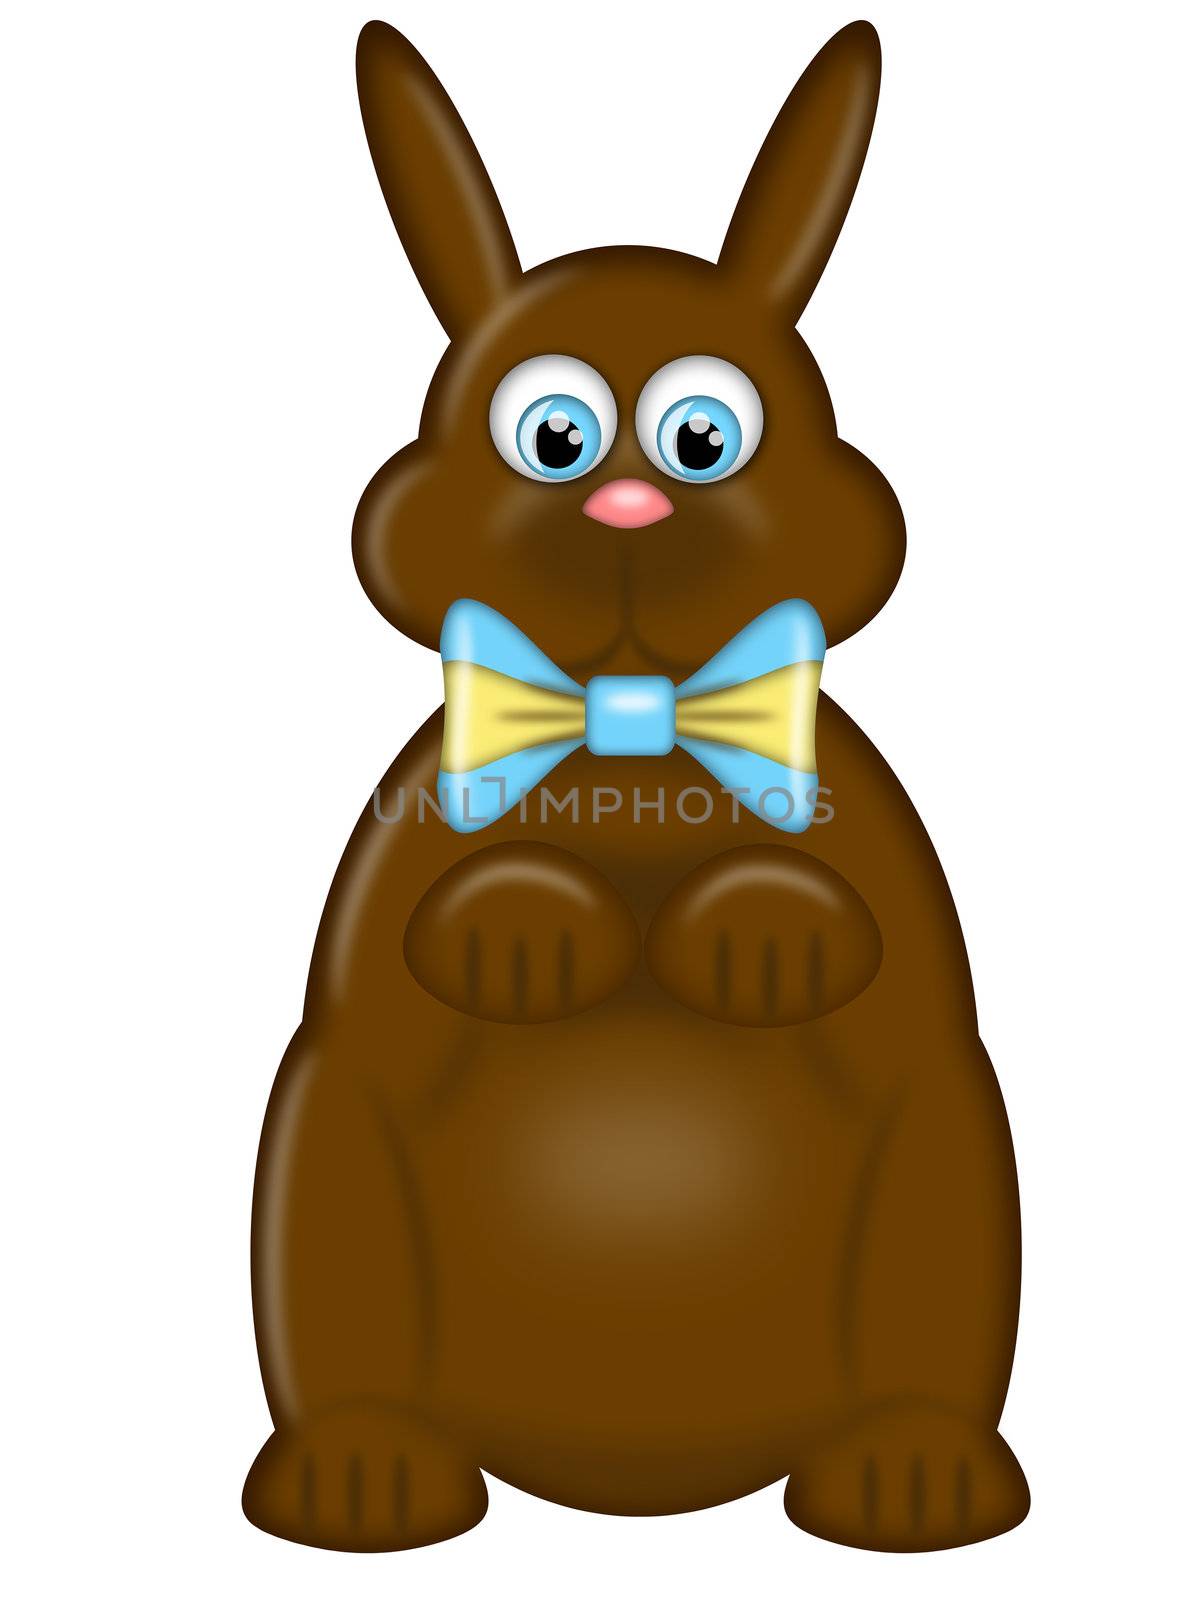 Happy Easter Day Chocolate Bunny Rabbit by Davidgn